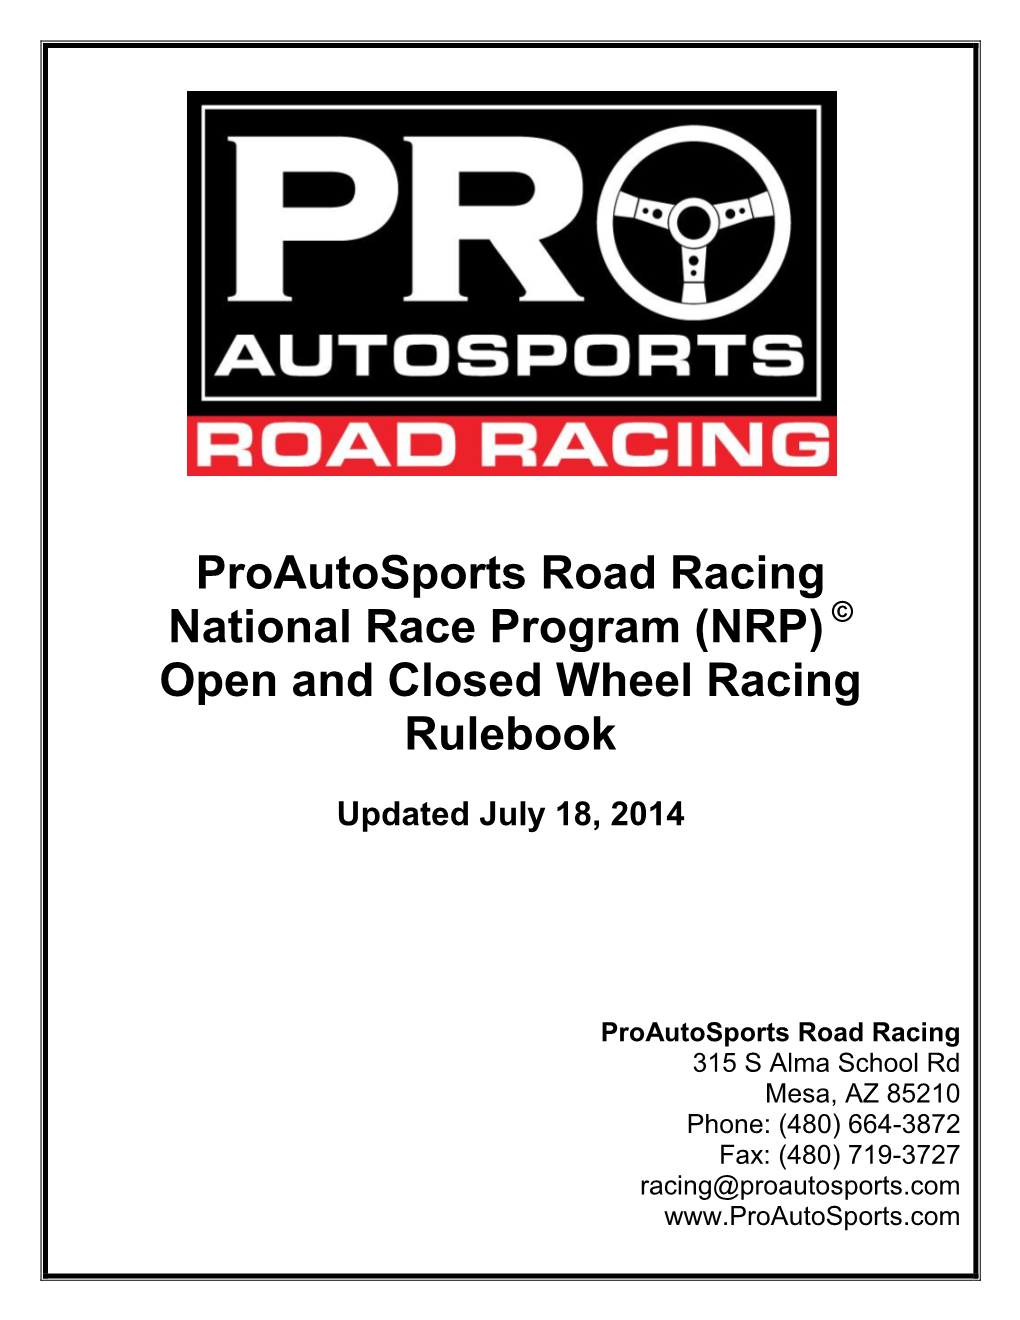 Proautosports Road Racing National Race Program (NRP) Open And